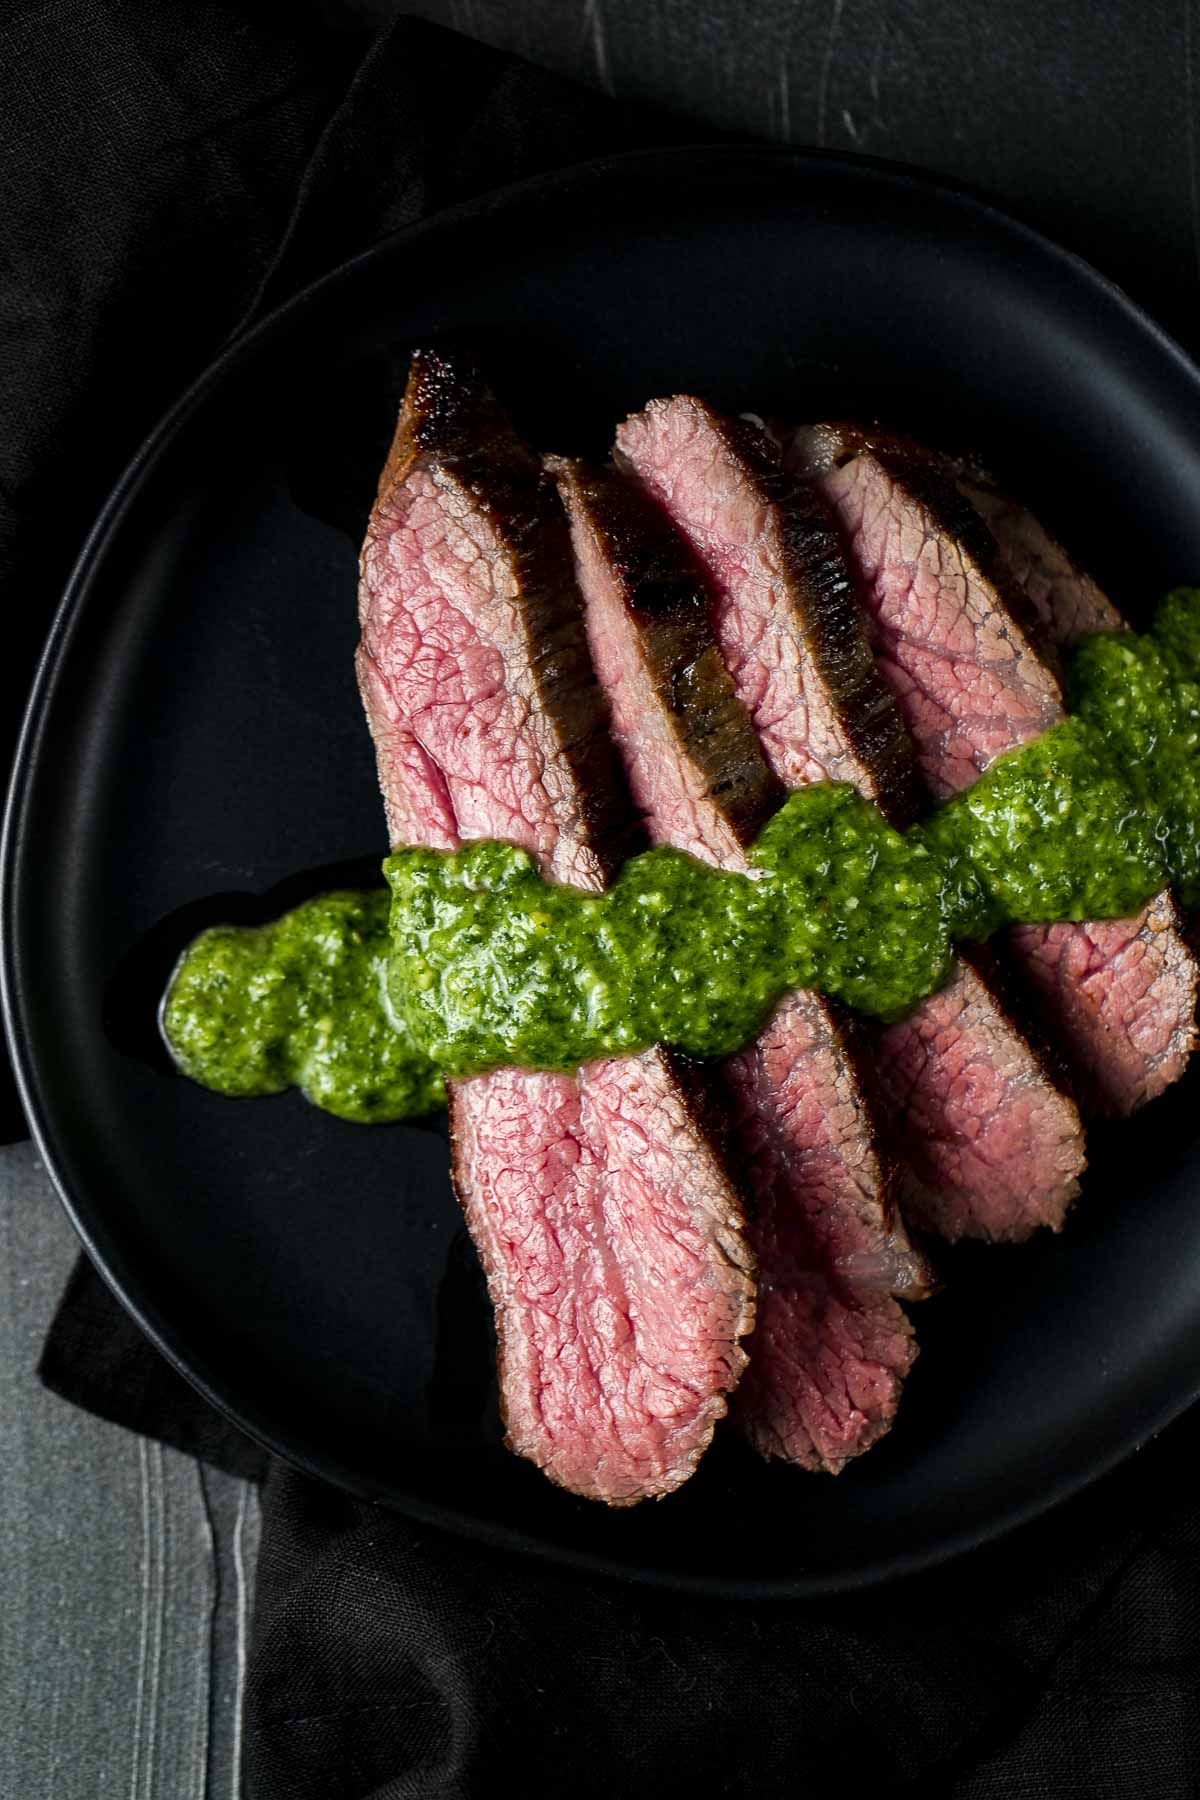 https://www.wenthere8this.com/wp-content/uploads/2021/02/sous-vide-tri-tip-5.jpg